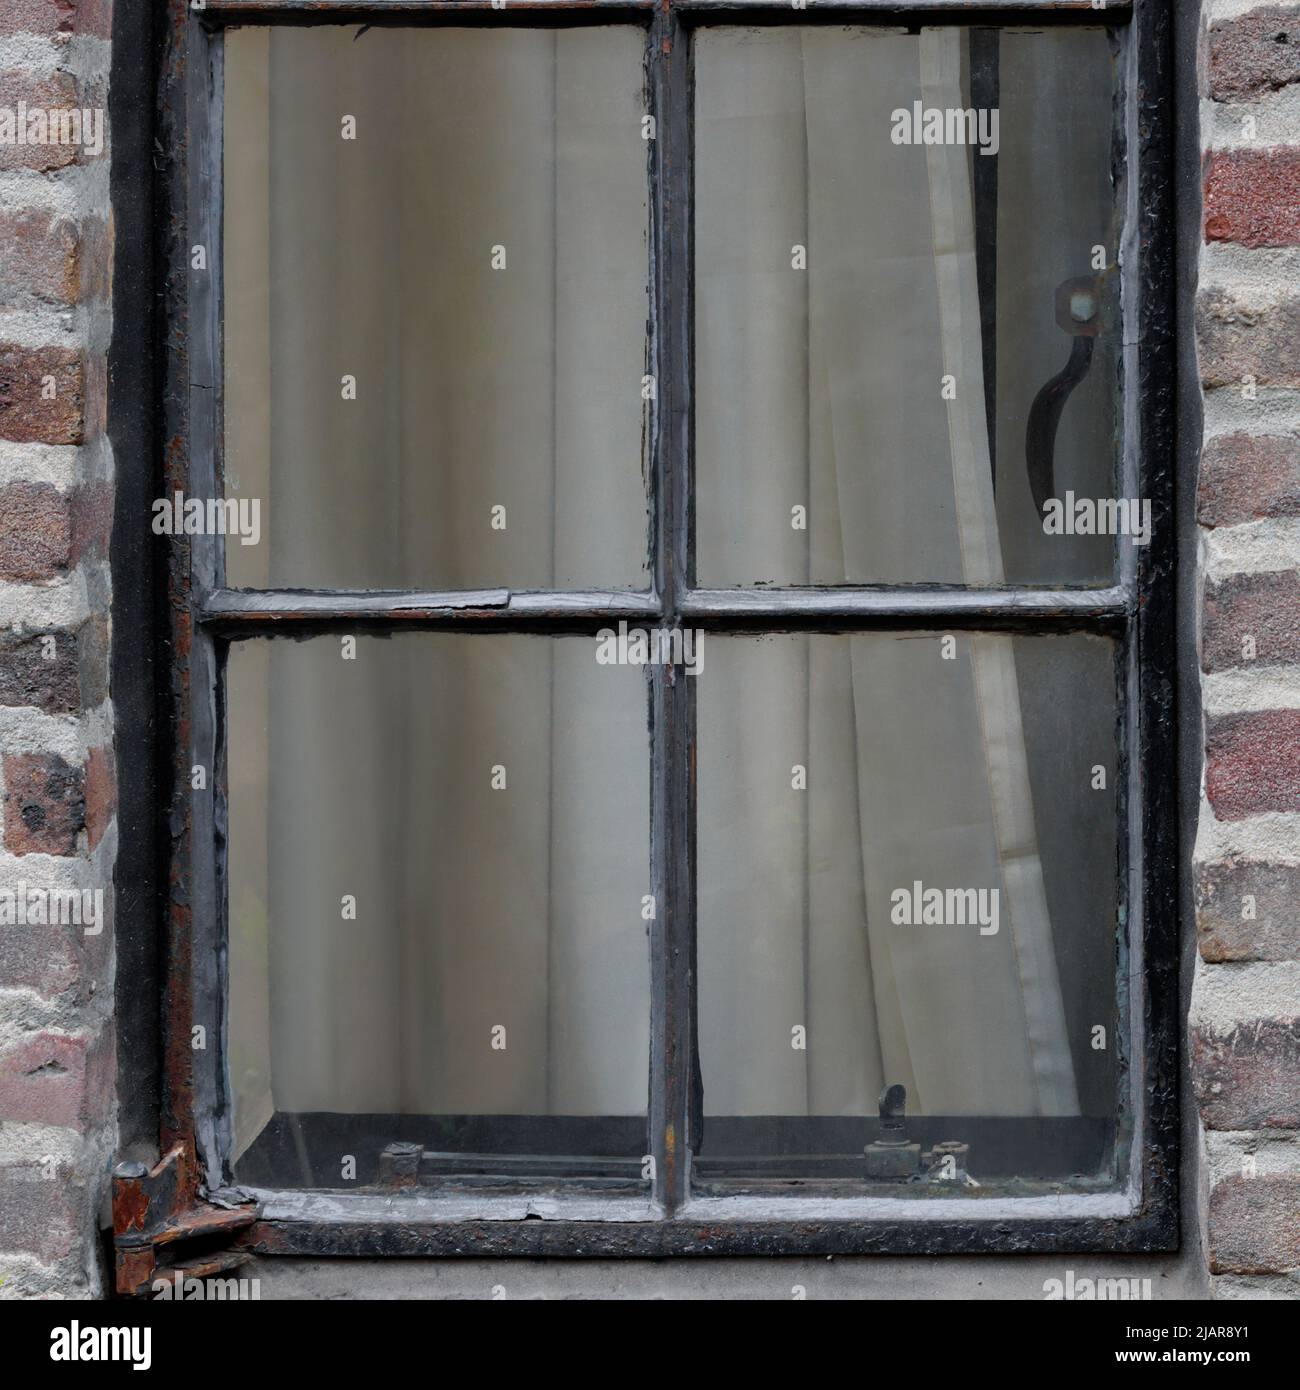 external view of antique casement window in an old red brick building, closed with curtains pulled, square format Stock Photo